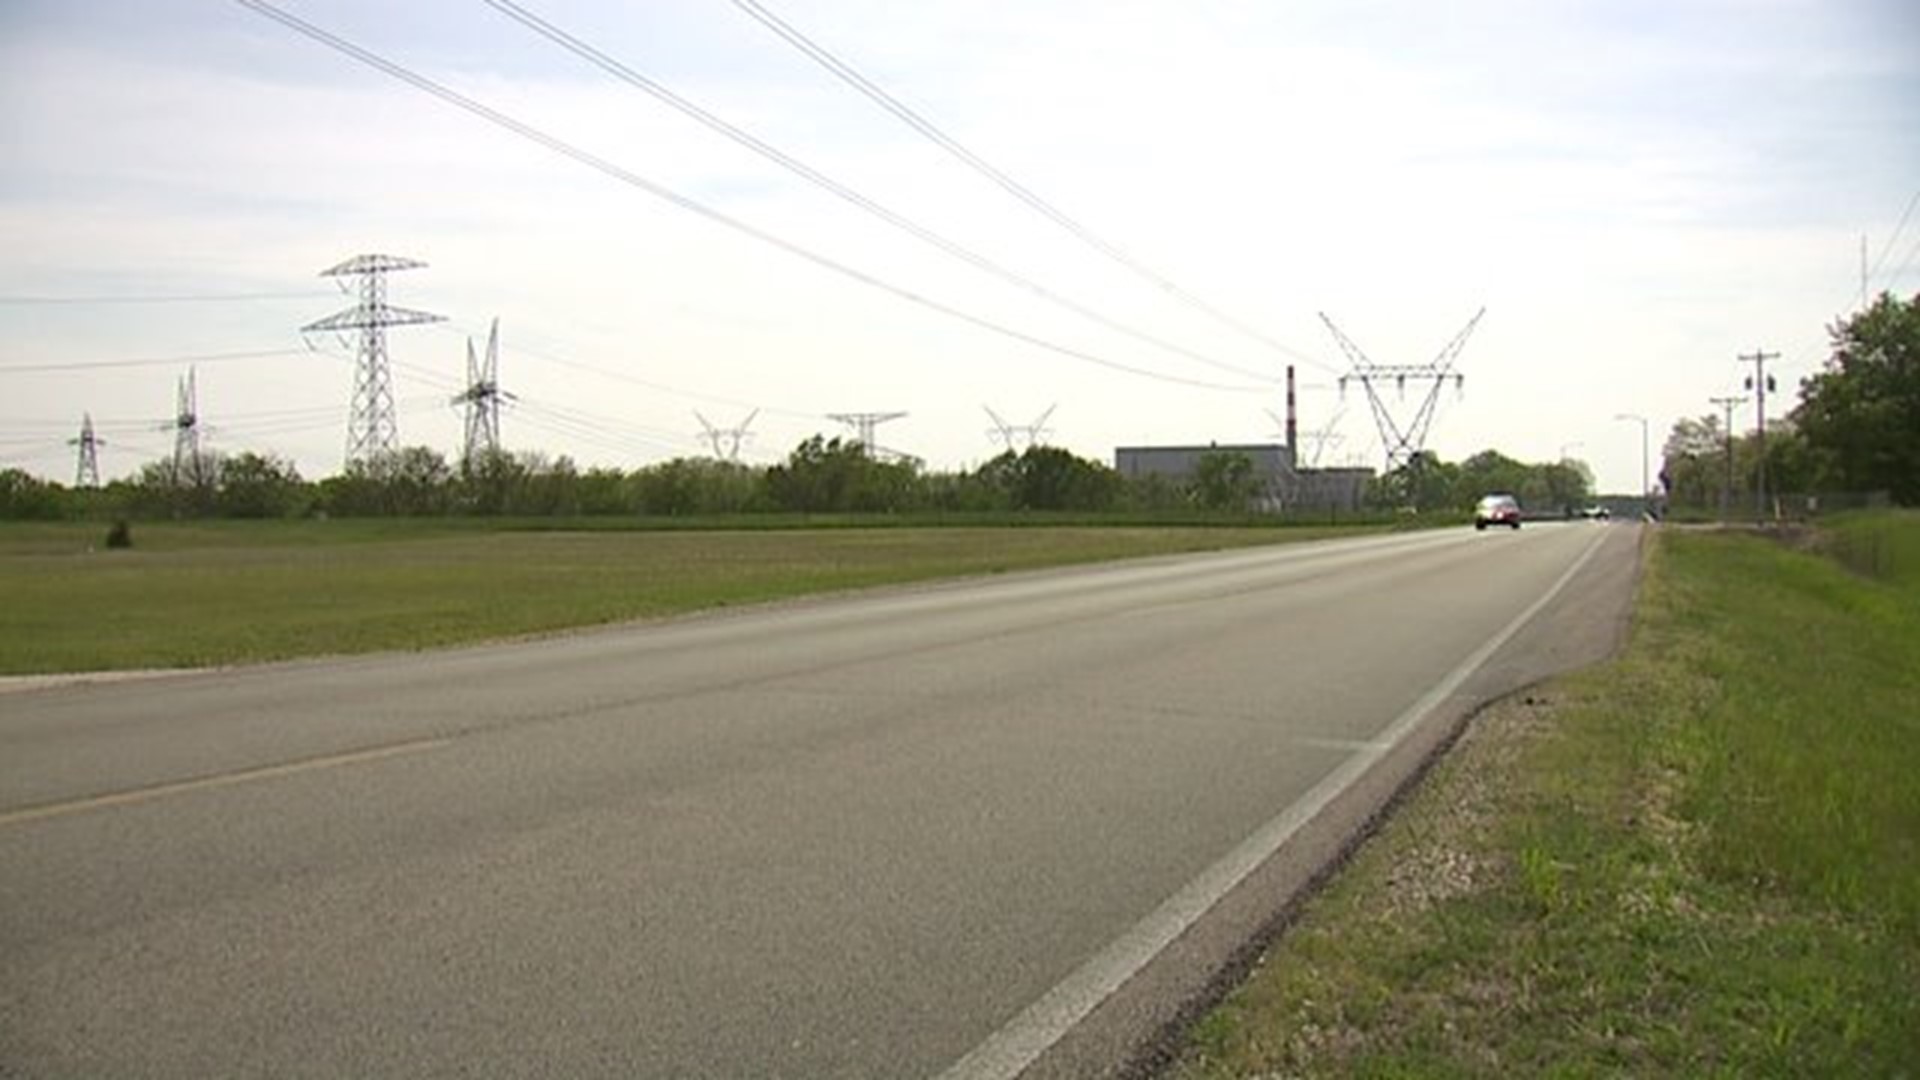 Exelon Shut Down Could Impact Local Business